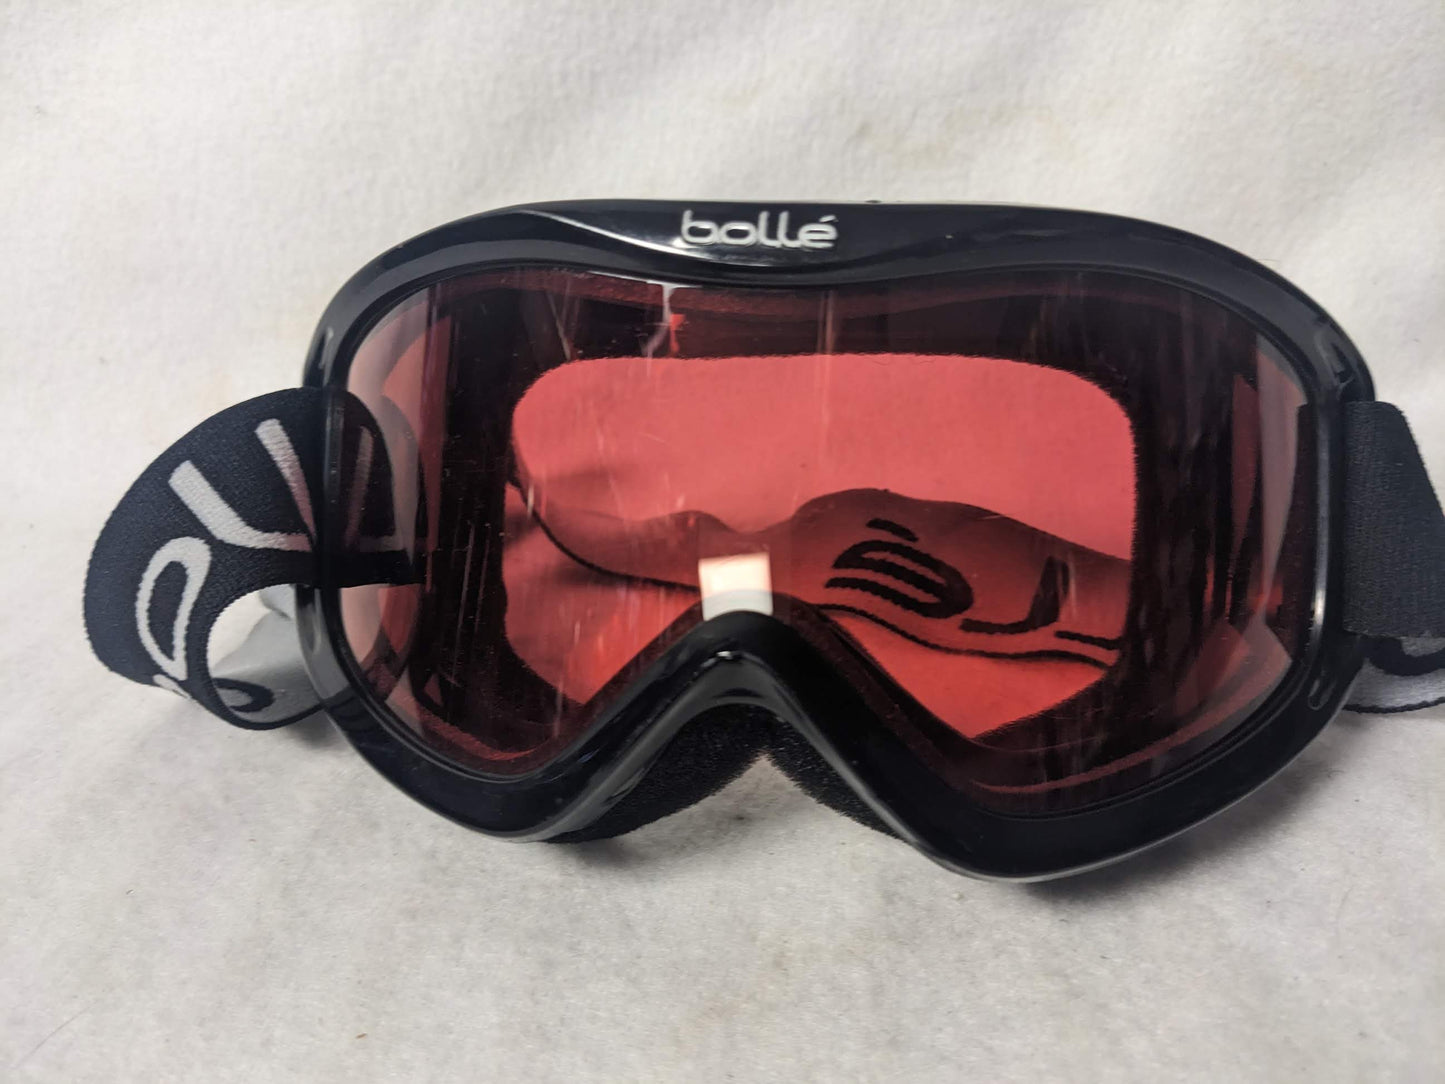 Bolle Ski/Snowboard Goggles Size Youth Color Black Condition Used